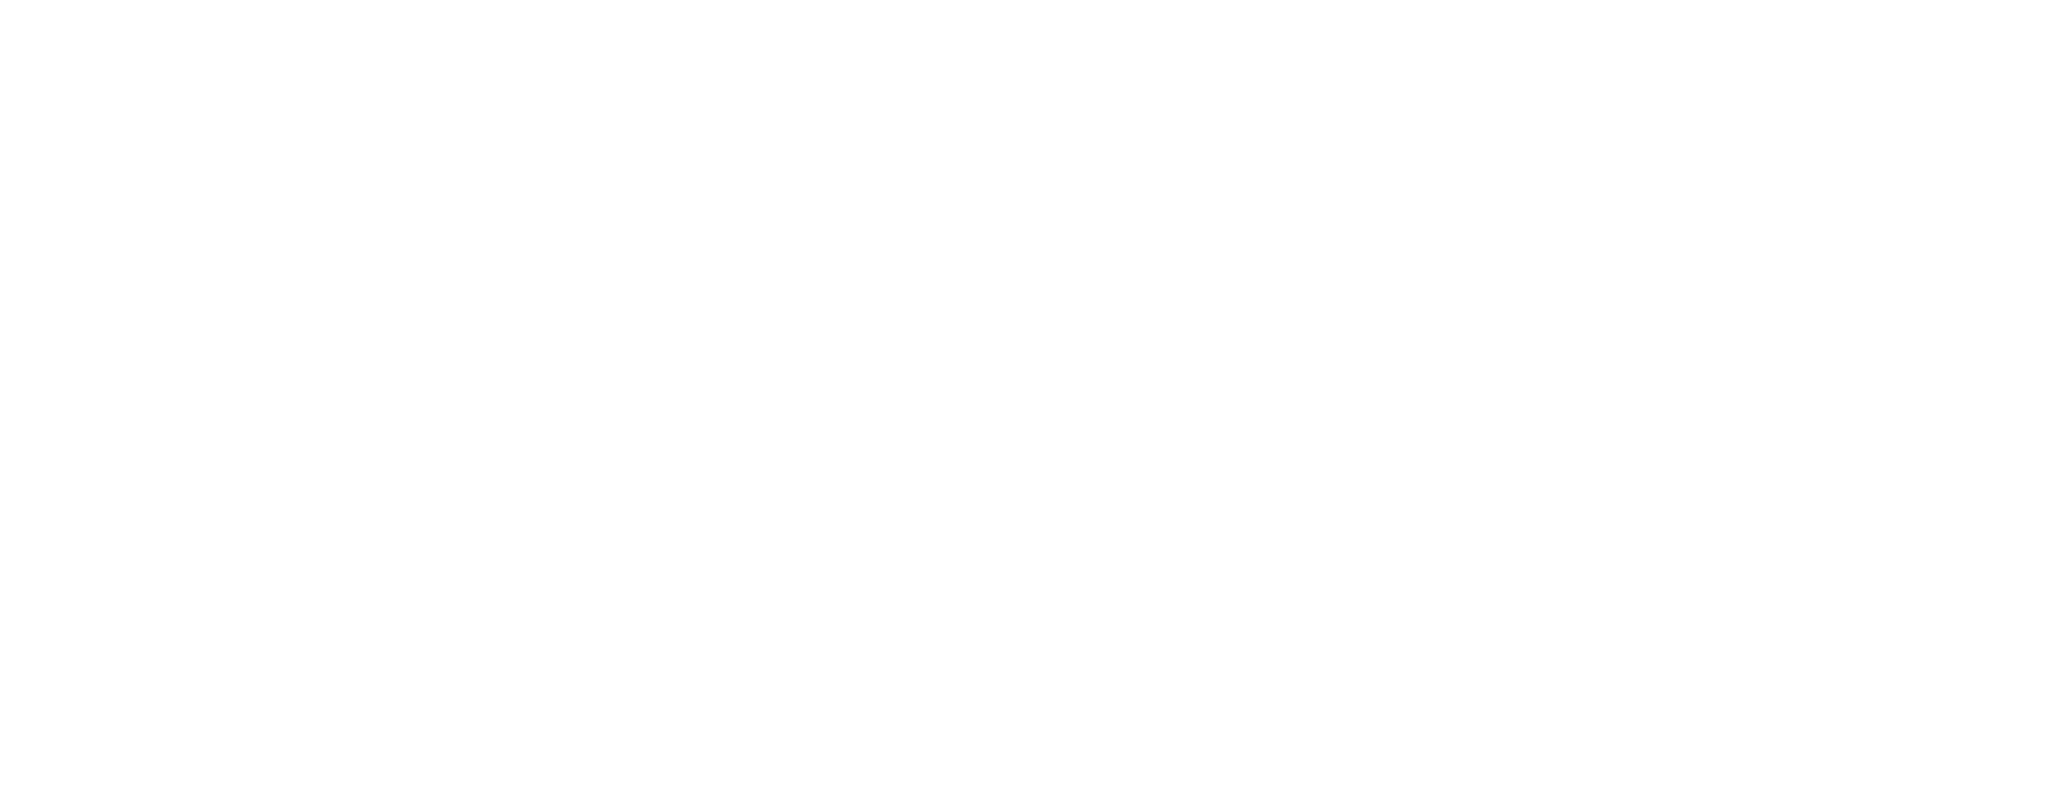 Parade Chiropractic Clinic